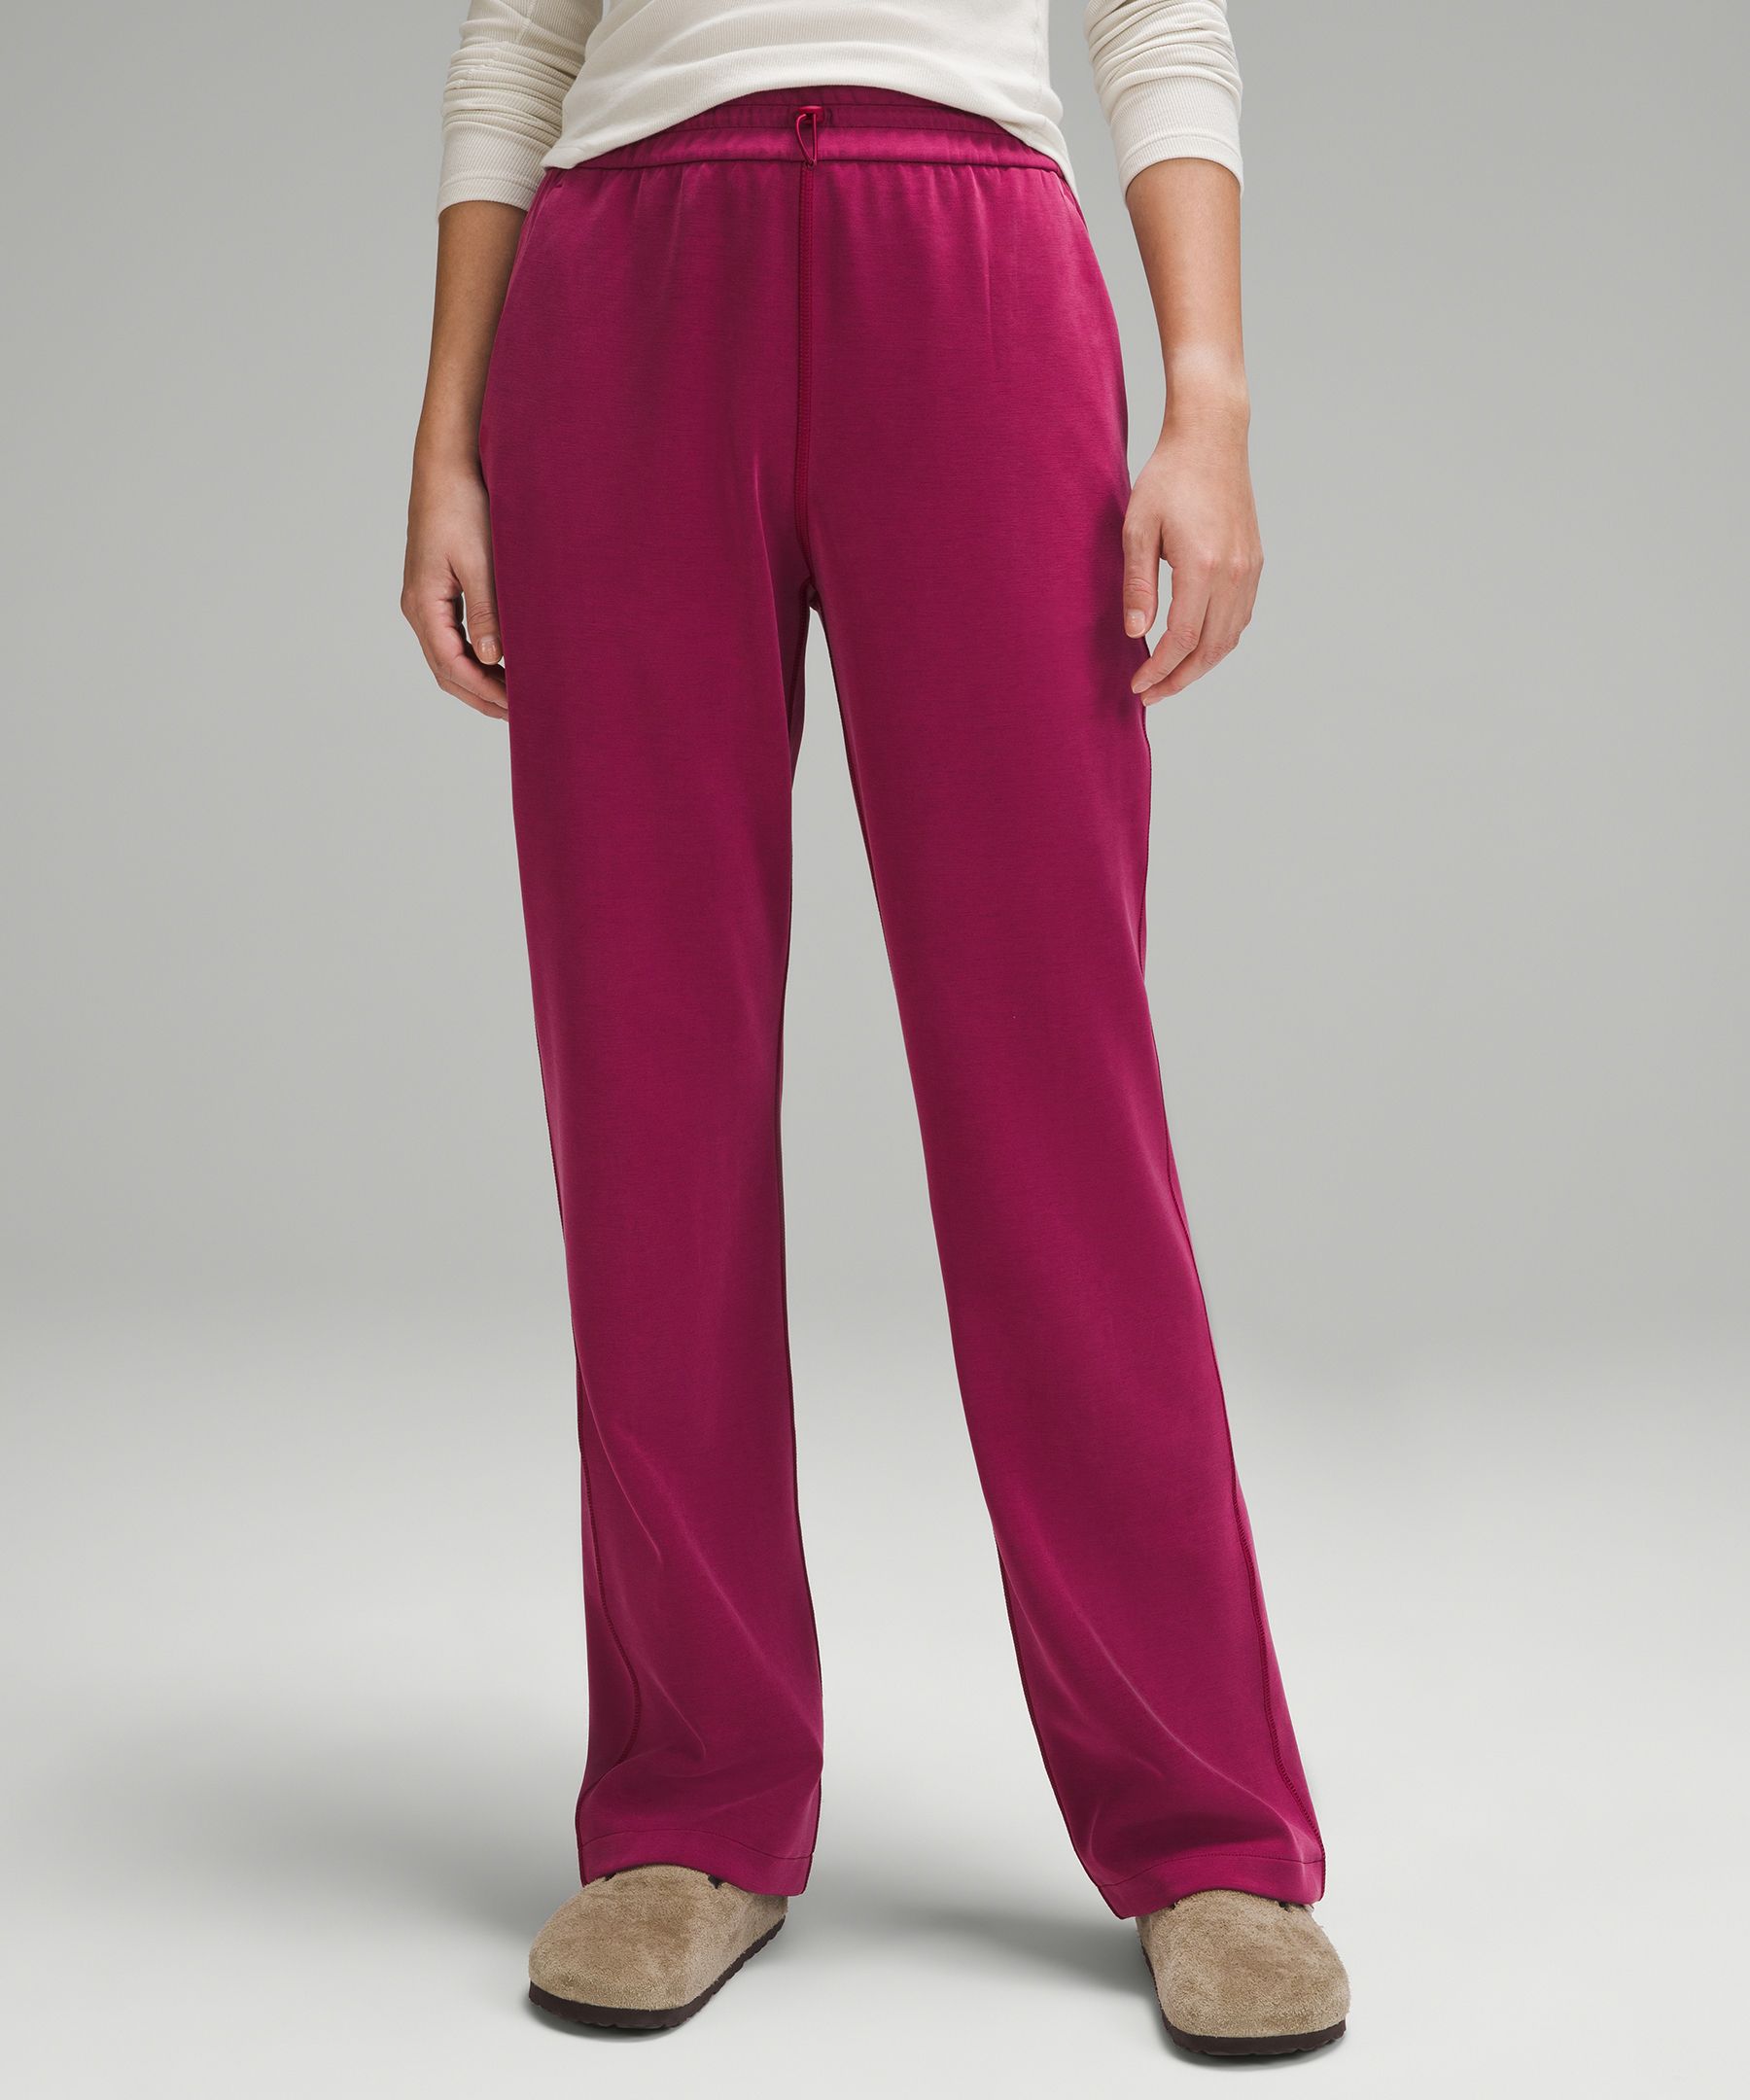 This Is That Feeling Modal Poly Lounge Pants with Pockets - SET A